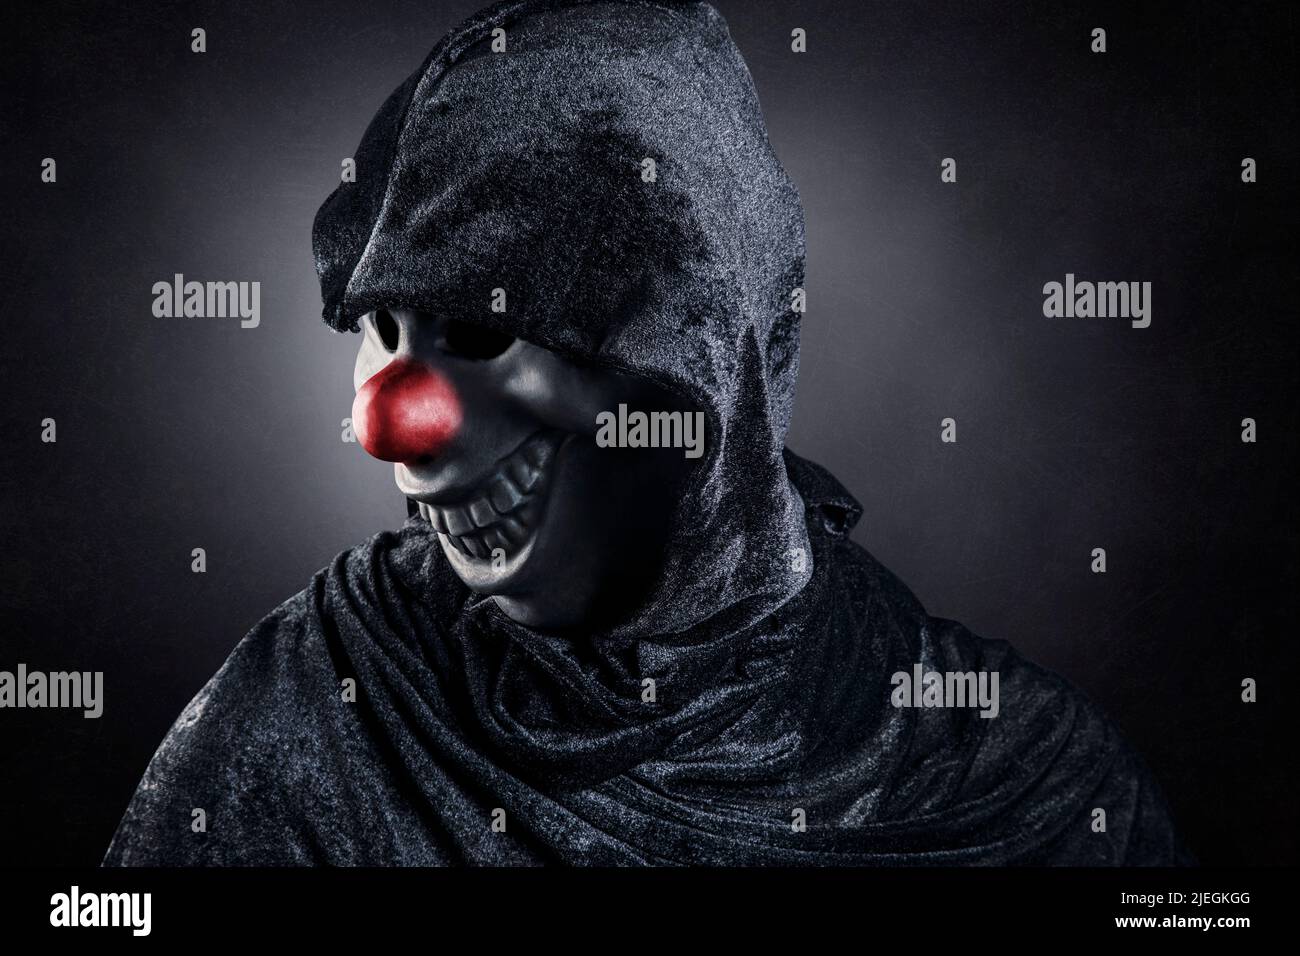 Scary clown showing his teeth over dark misty background Stock Photo